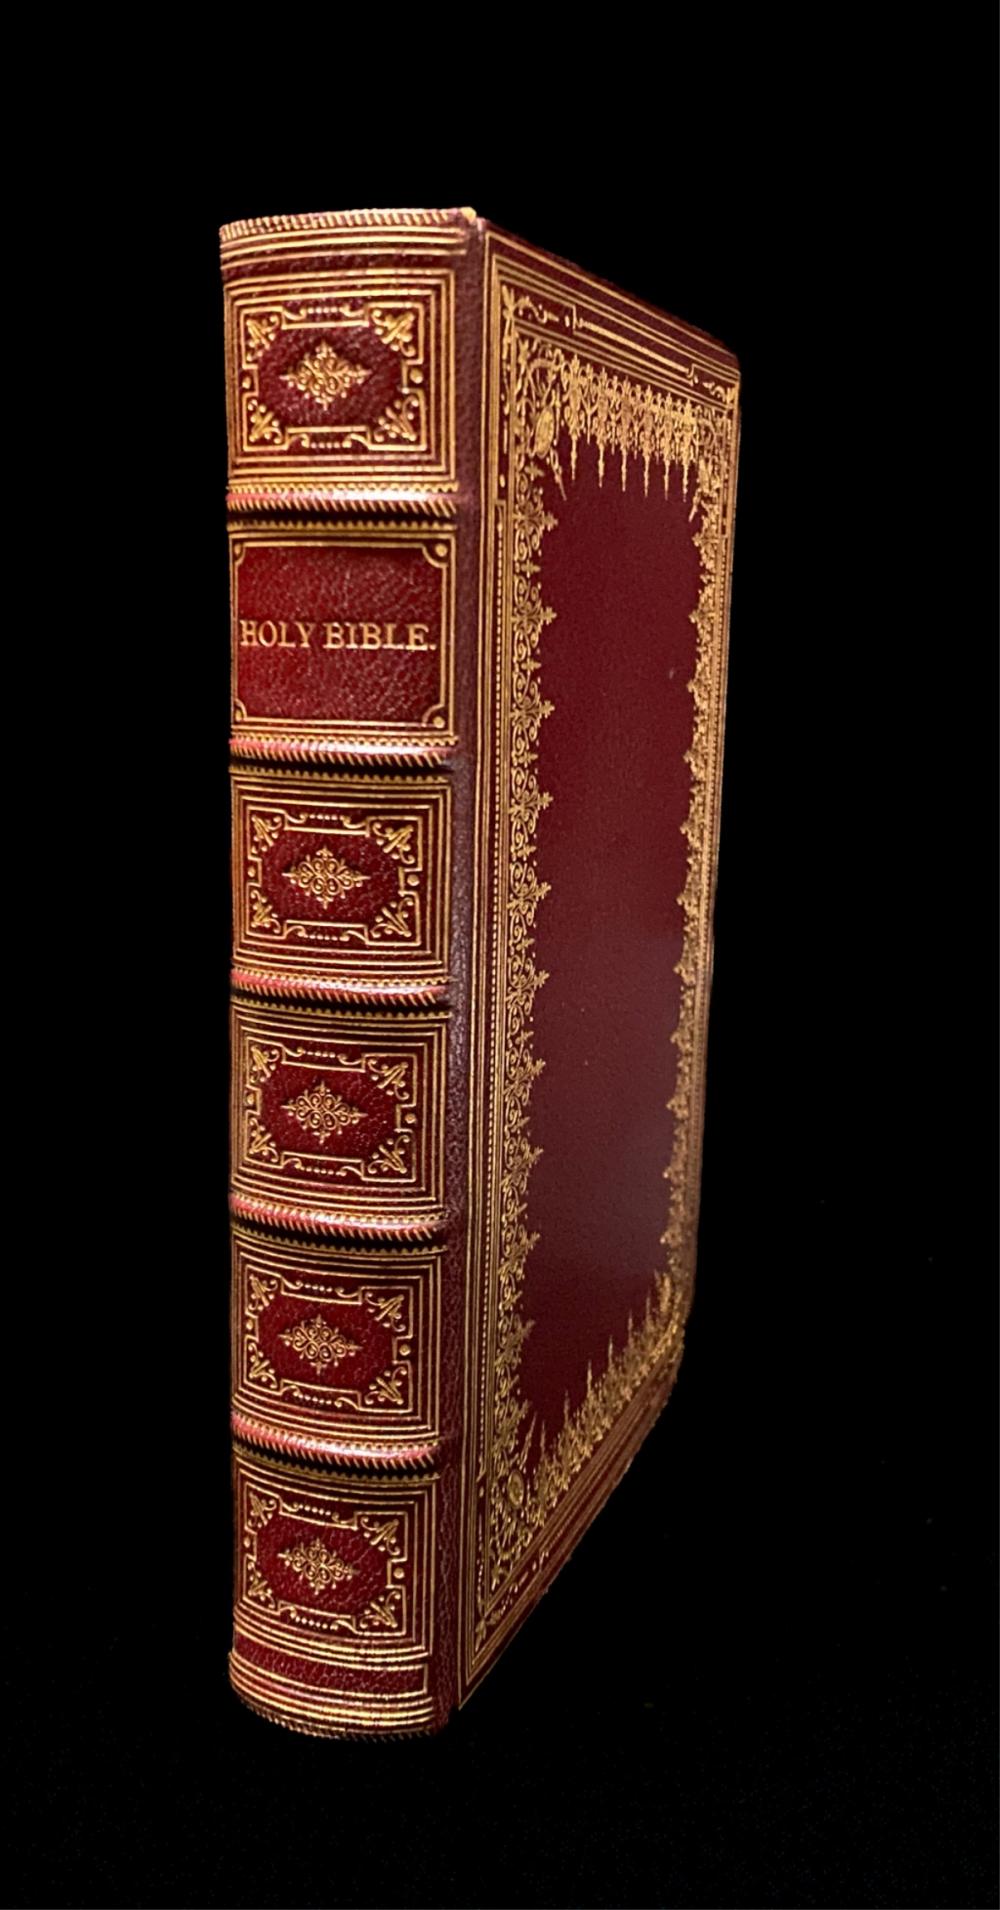 THE HOLY BIBLE, 1891The Holy Bible.